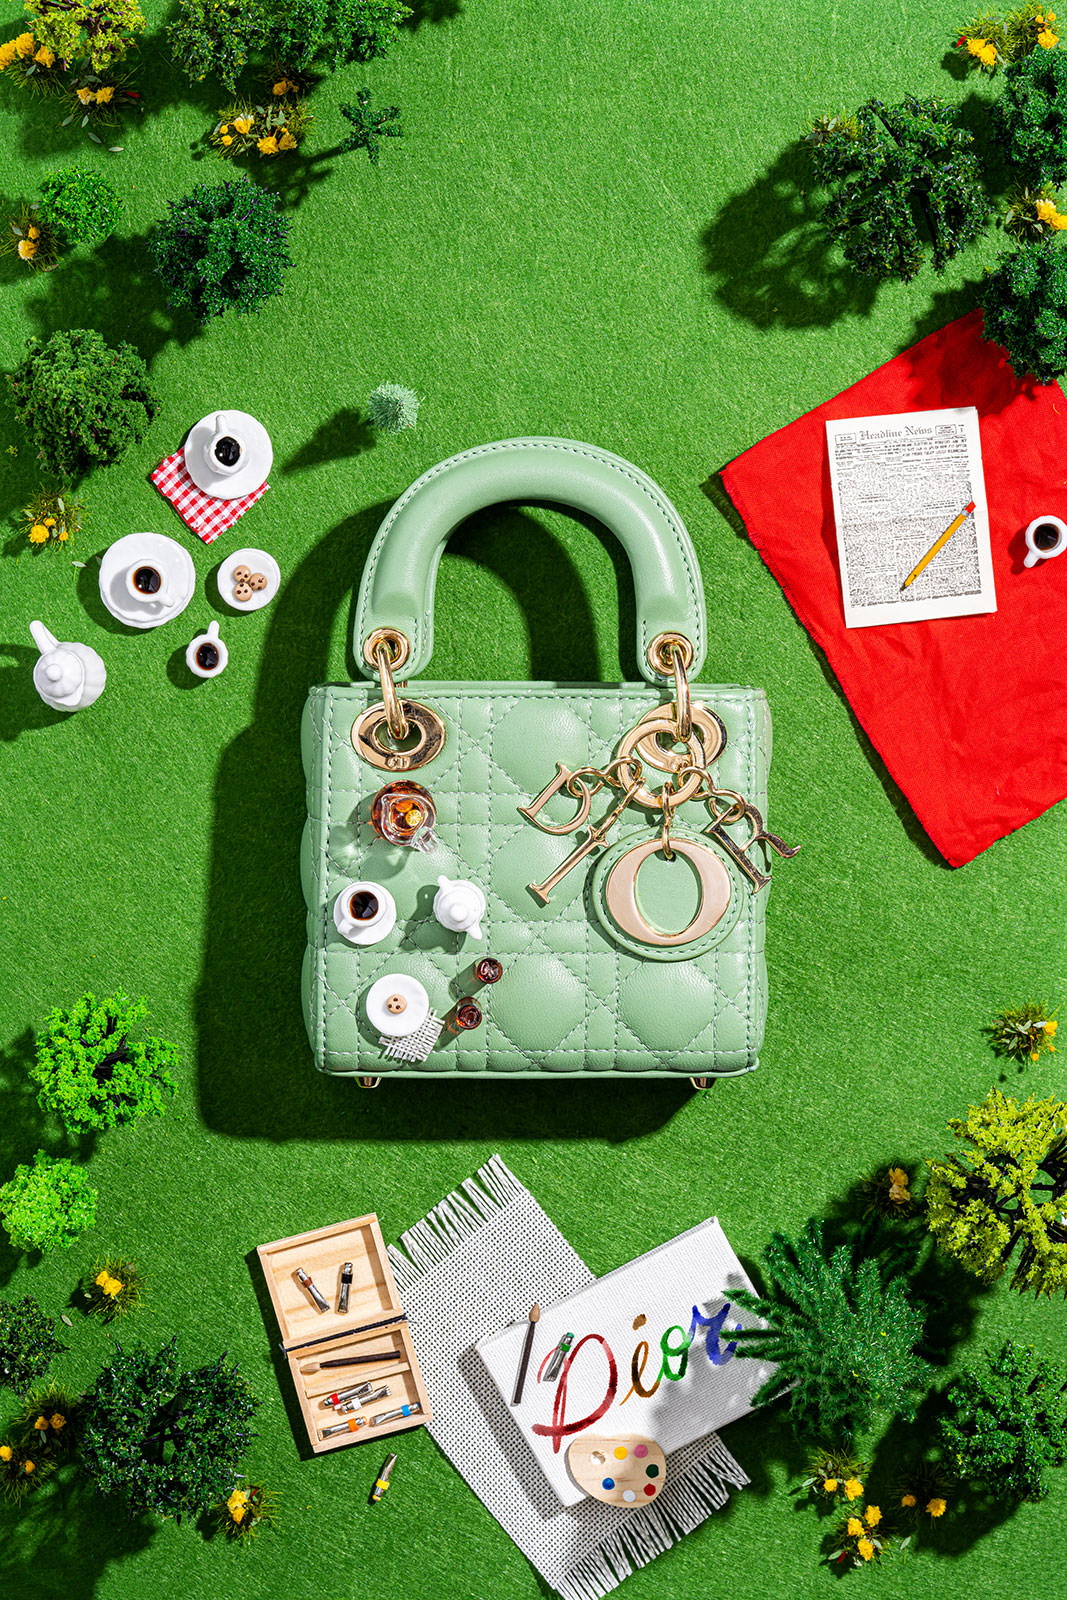 DIOR PRESENTS DIOR MICRO BAGS WITH CELEBRITIES